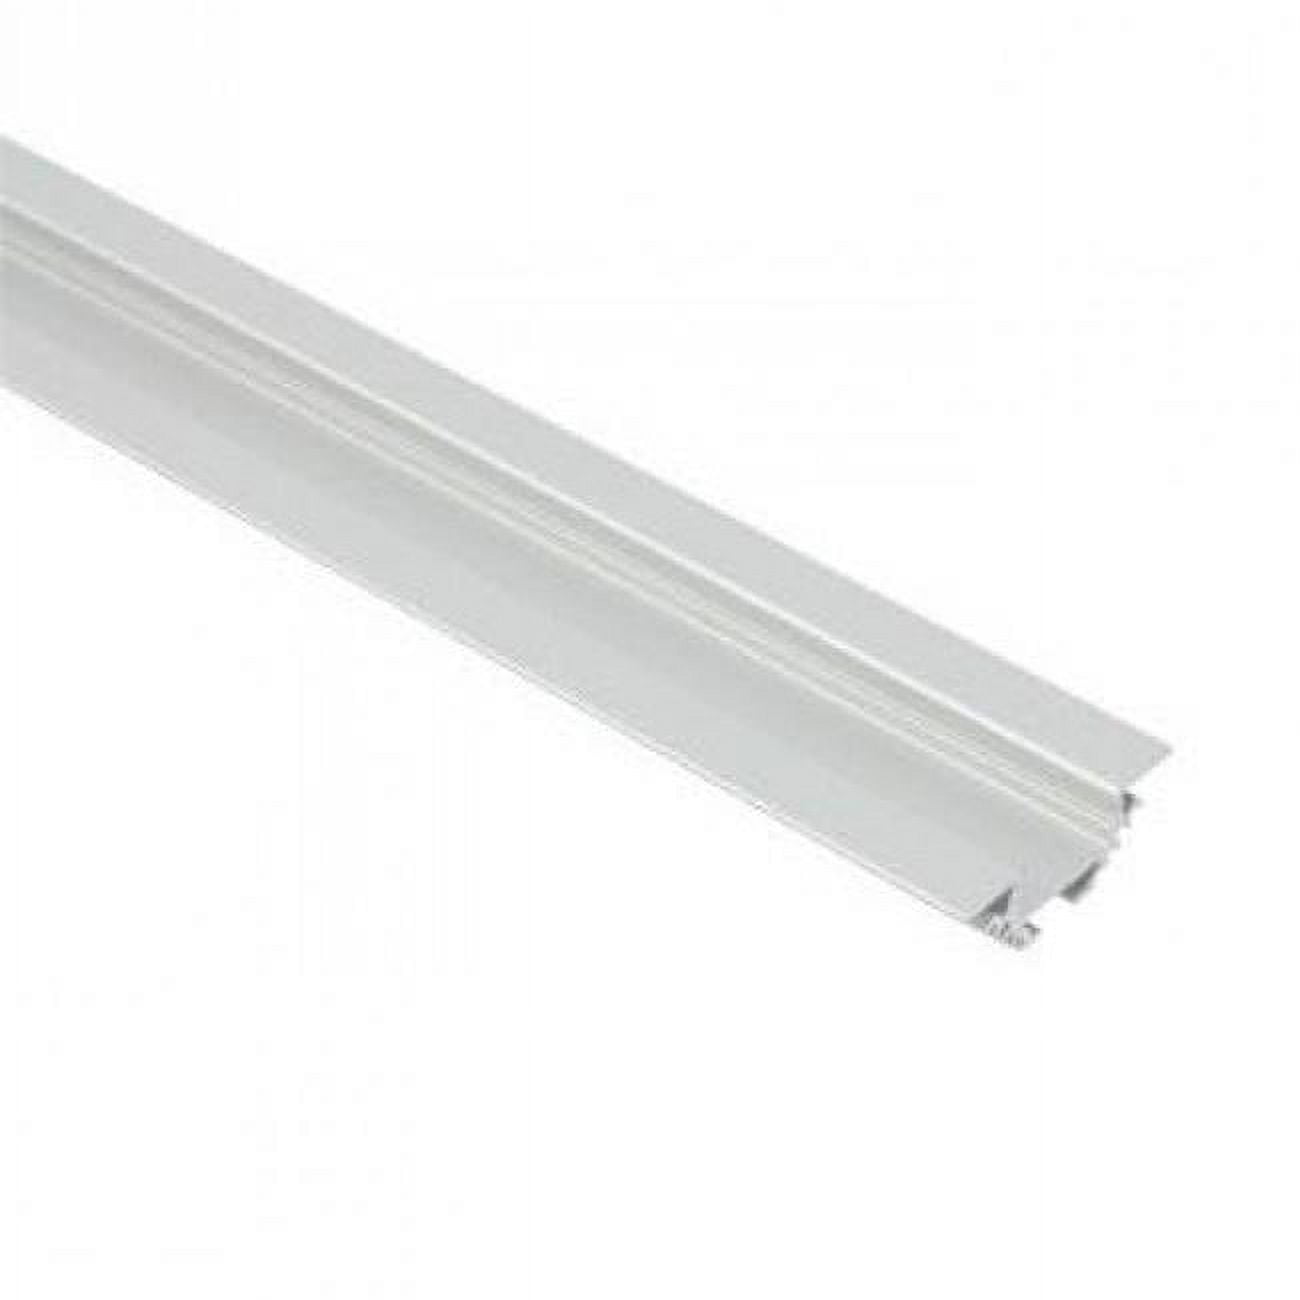 Pe-pro45-1m 39.4 In. Pro 45 Surface Mount Anodized Aluminum Extrusion